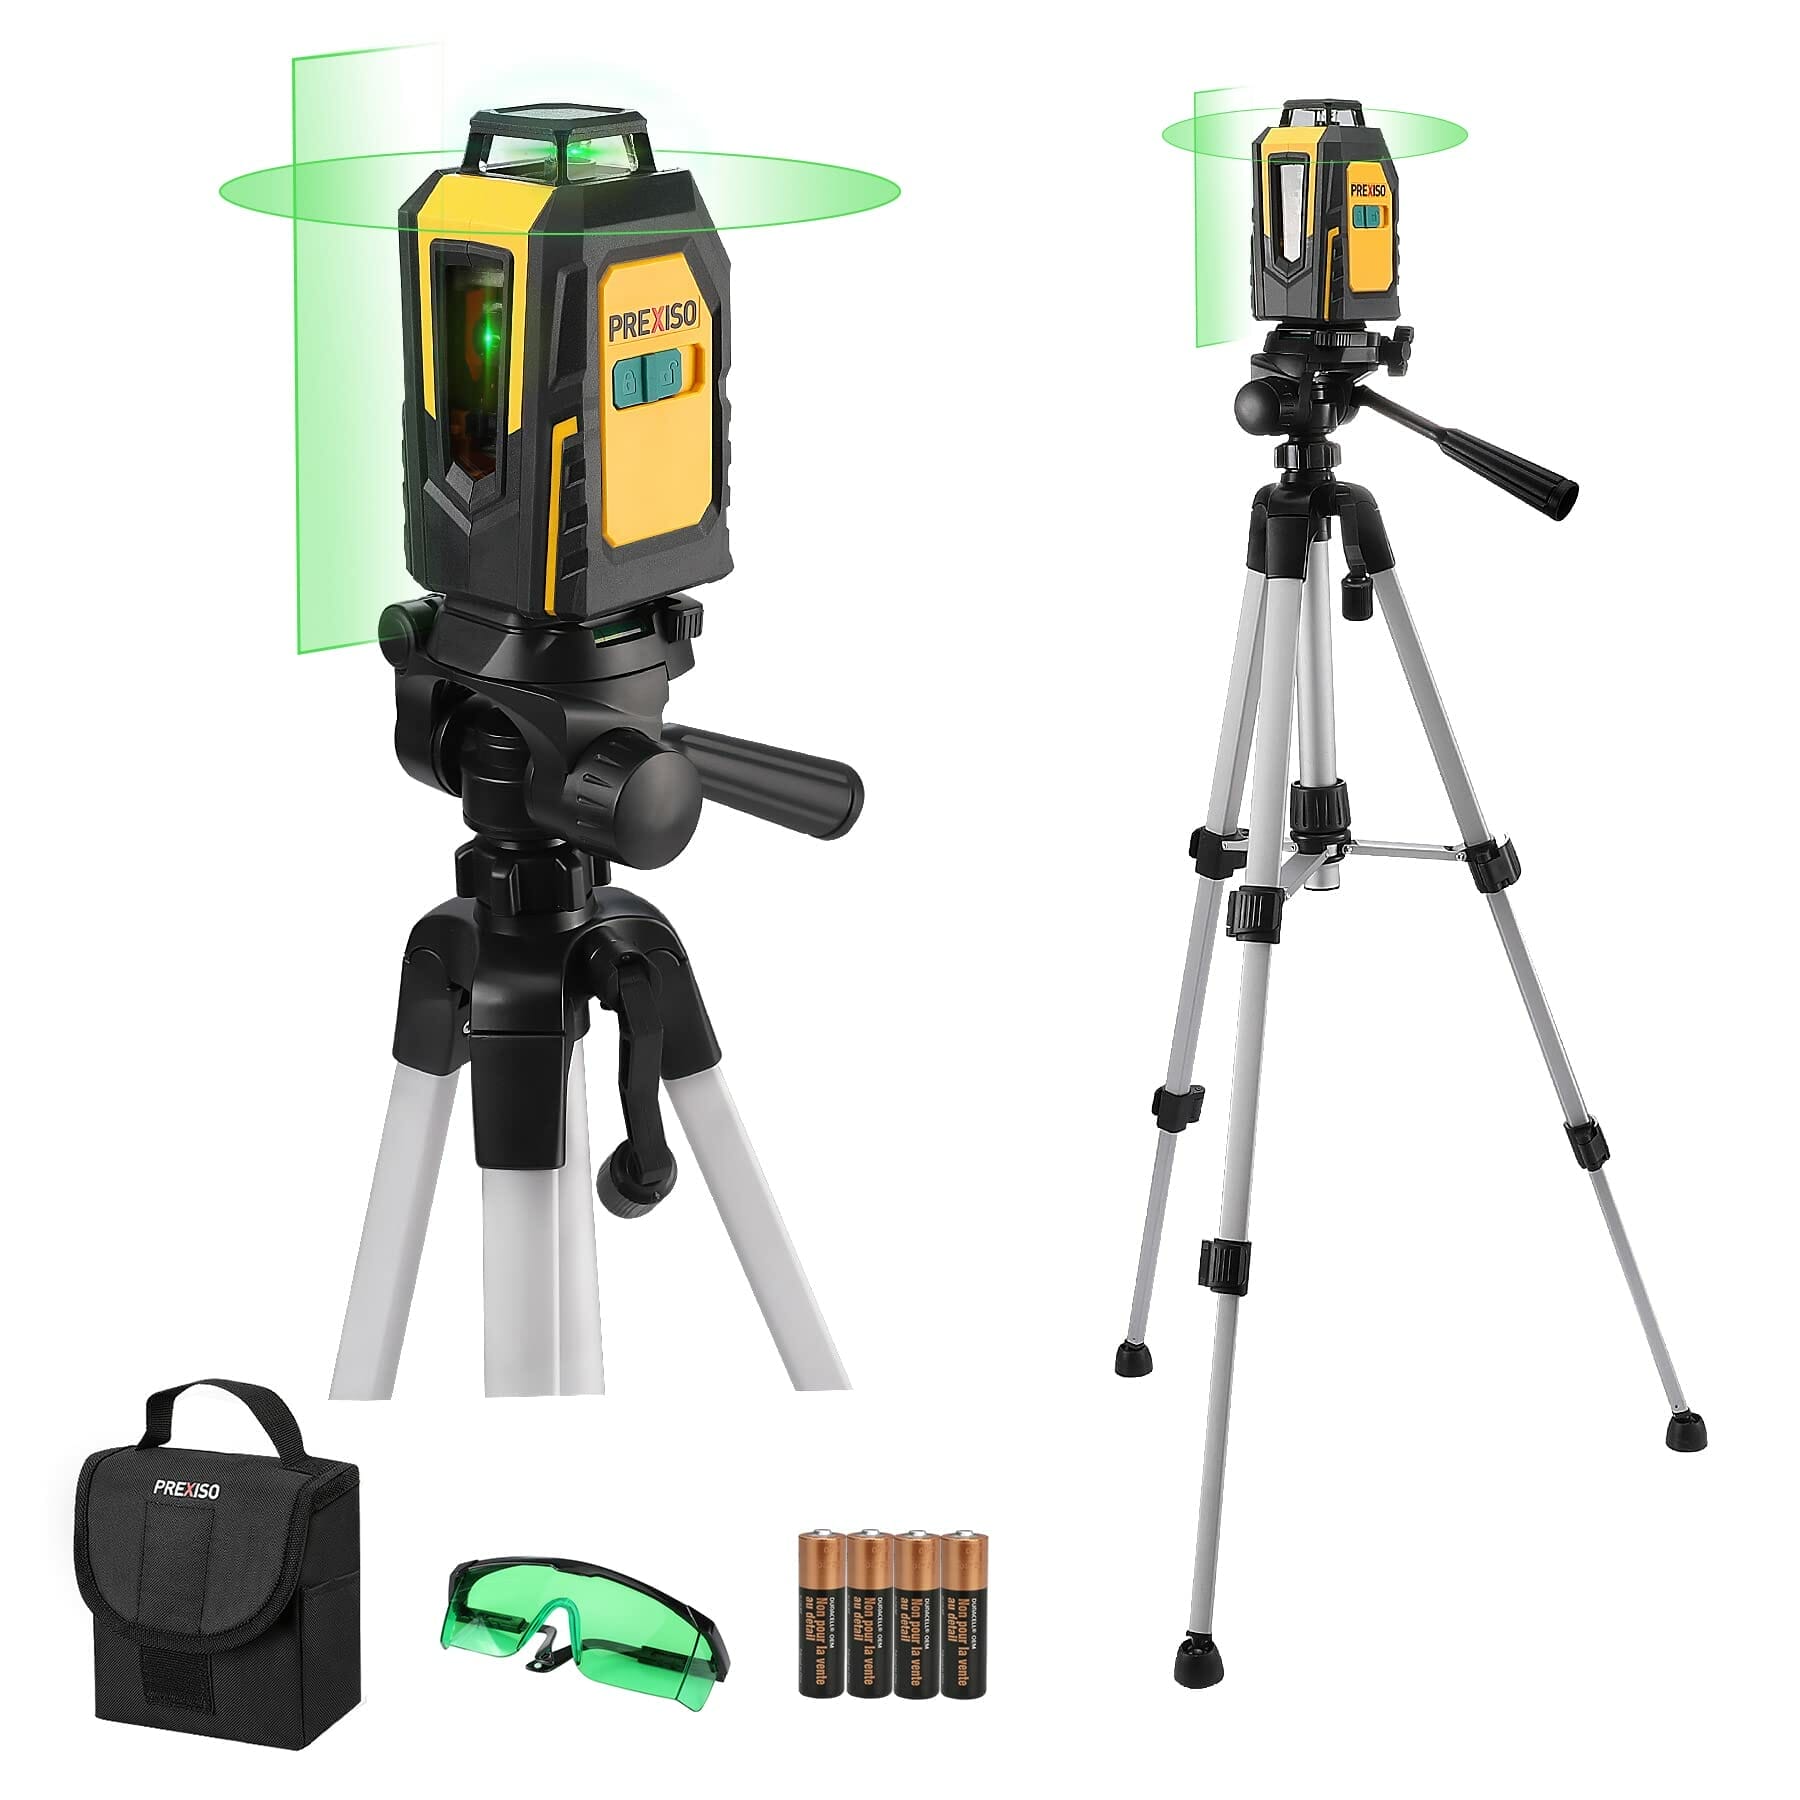 A PREXISO 360° Laser Level Review for construction with green line, tripod, and accessories.